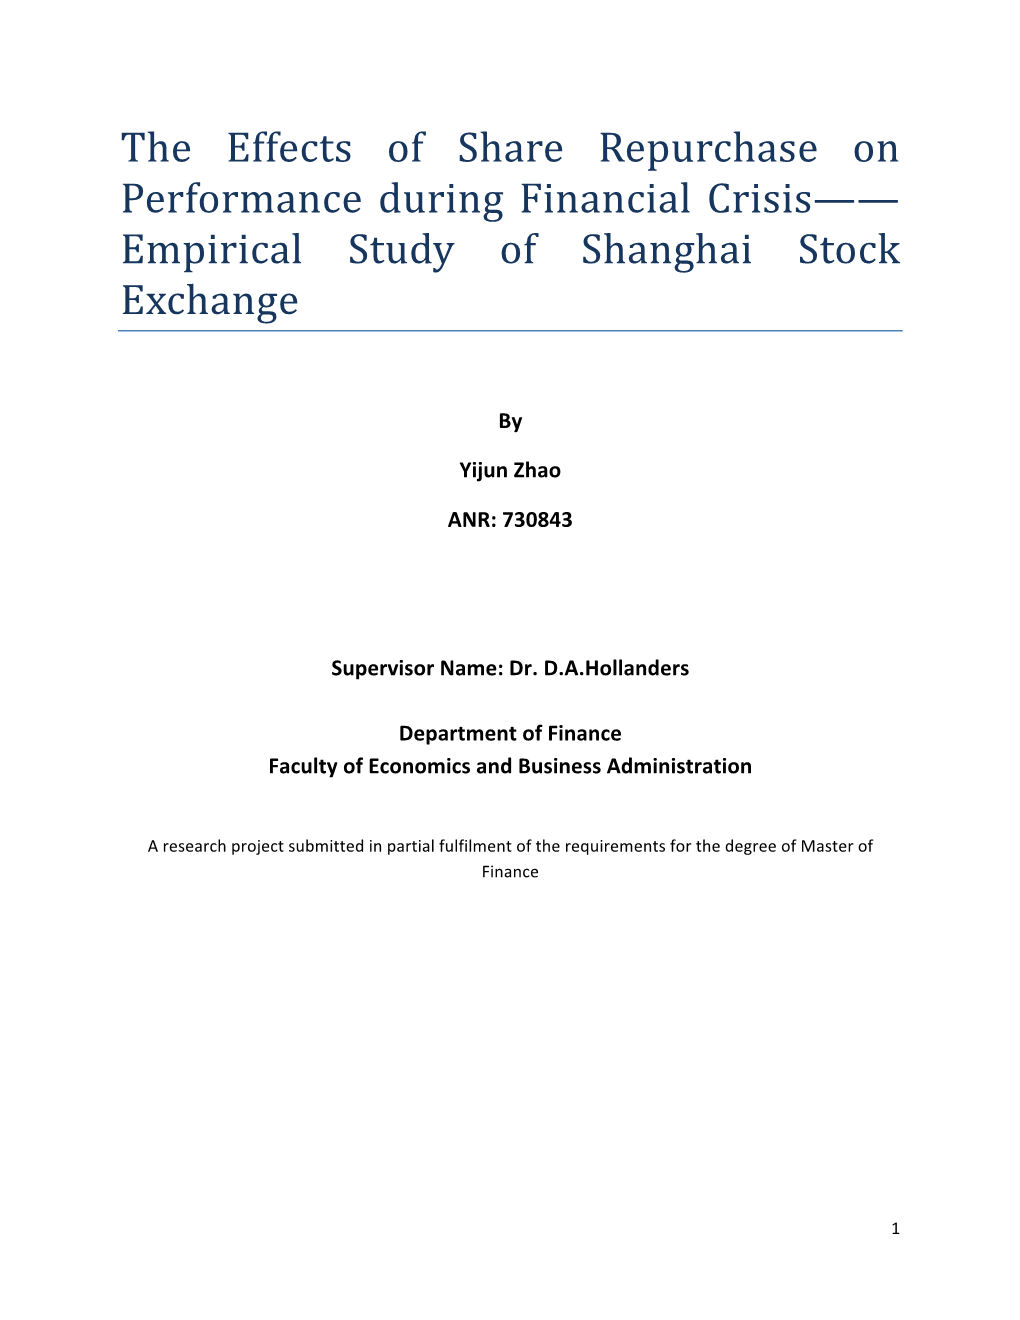 The Effects of Share Repurchase on Performance During Financial Crisis—— Empirical Study of Shanghai Stock Exchange